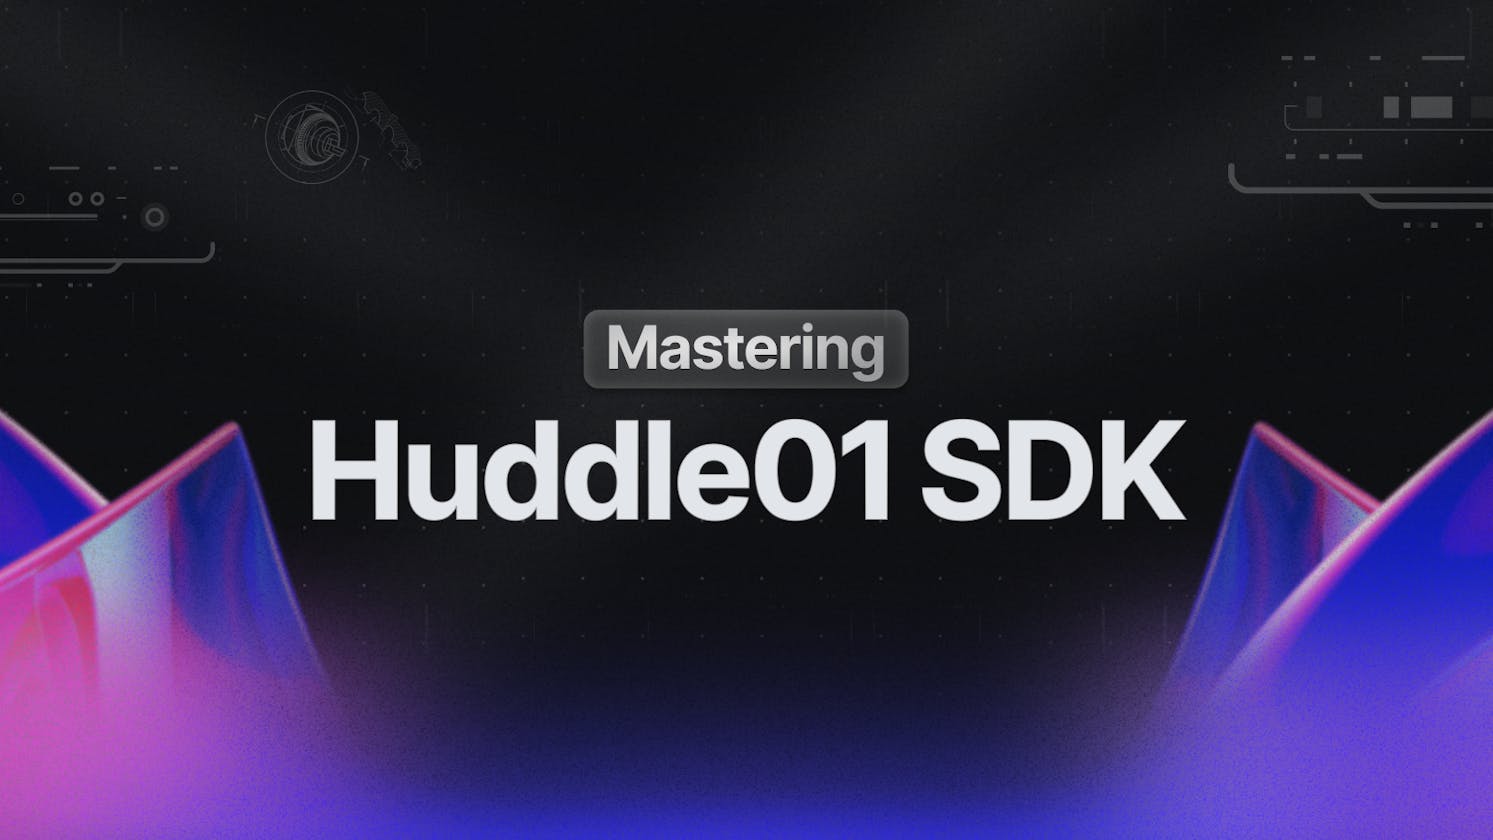 Mastering the Huddle01 SDK - 8 tips to keep in mind